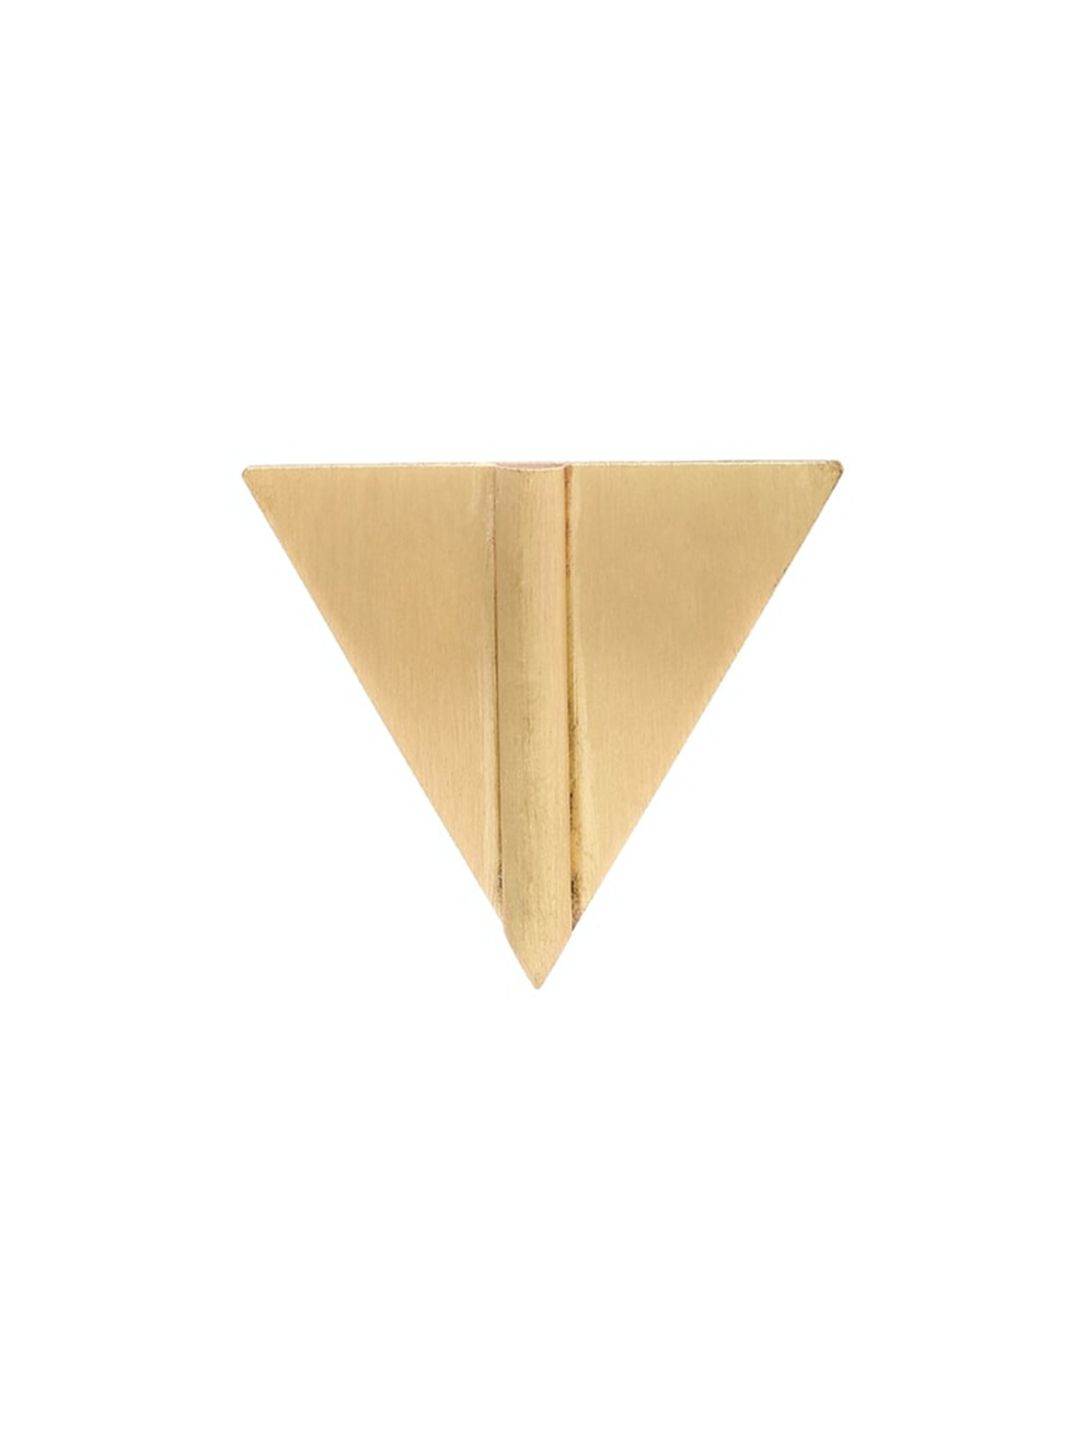 FOREVER 21 Gold-Toned Handcrafted Geometric Studs Price in India